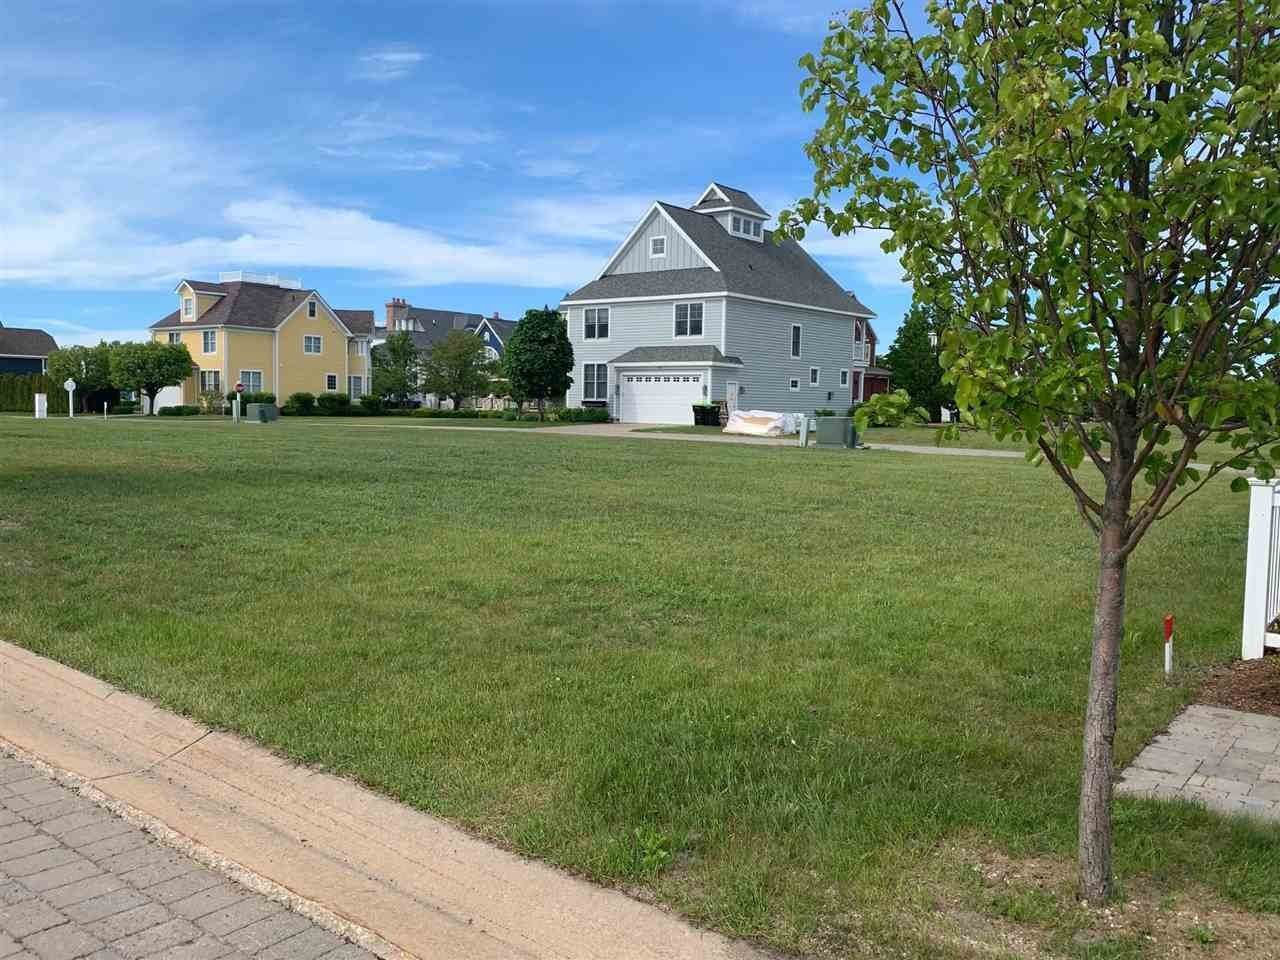 4. Land for Sale at 757 & 765 W Beach Street Bay Harbor, Michigan 49770 United States